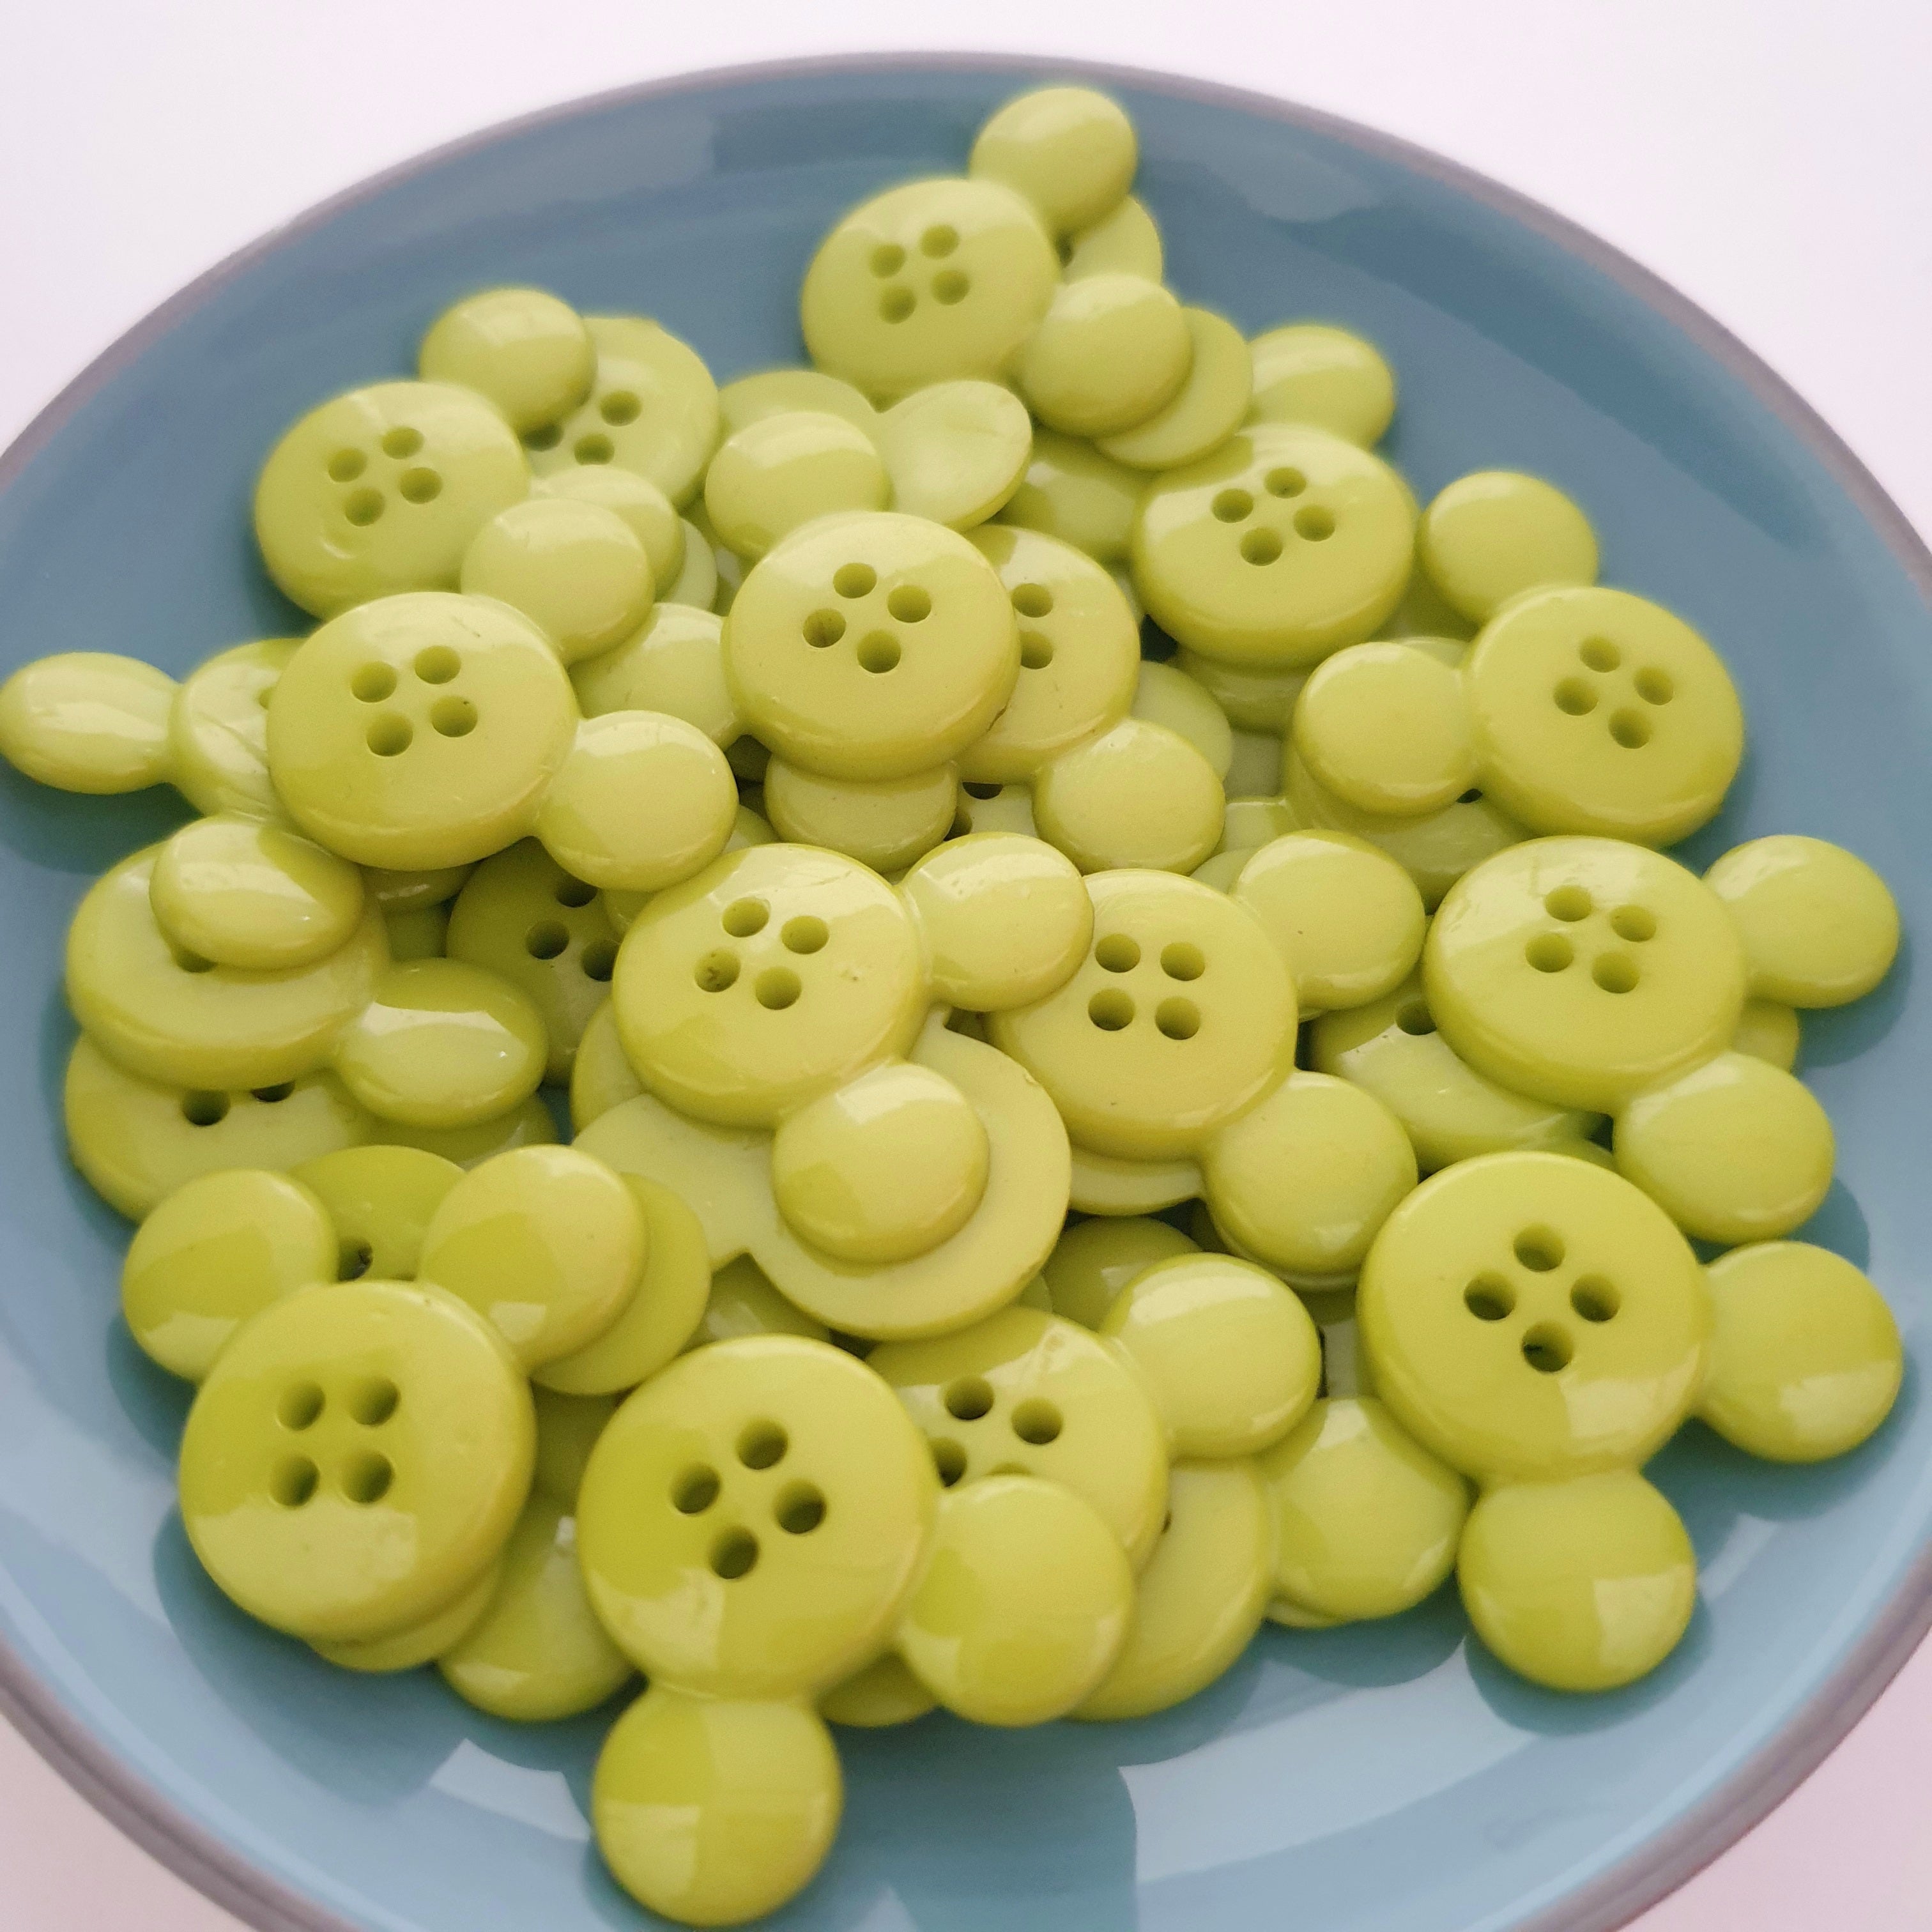 MajorCrafts 34pcs 22mm Lime Green 4 Holes Mouse Head Shape Resin Sewing Buttons